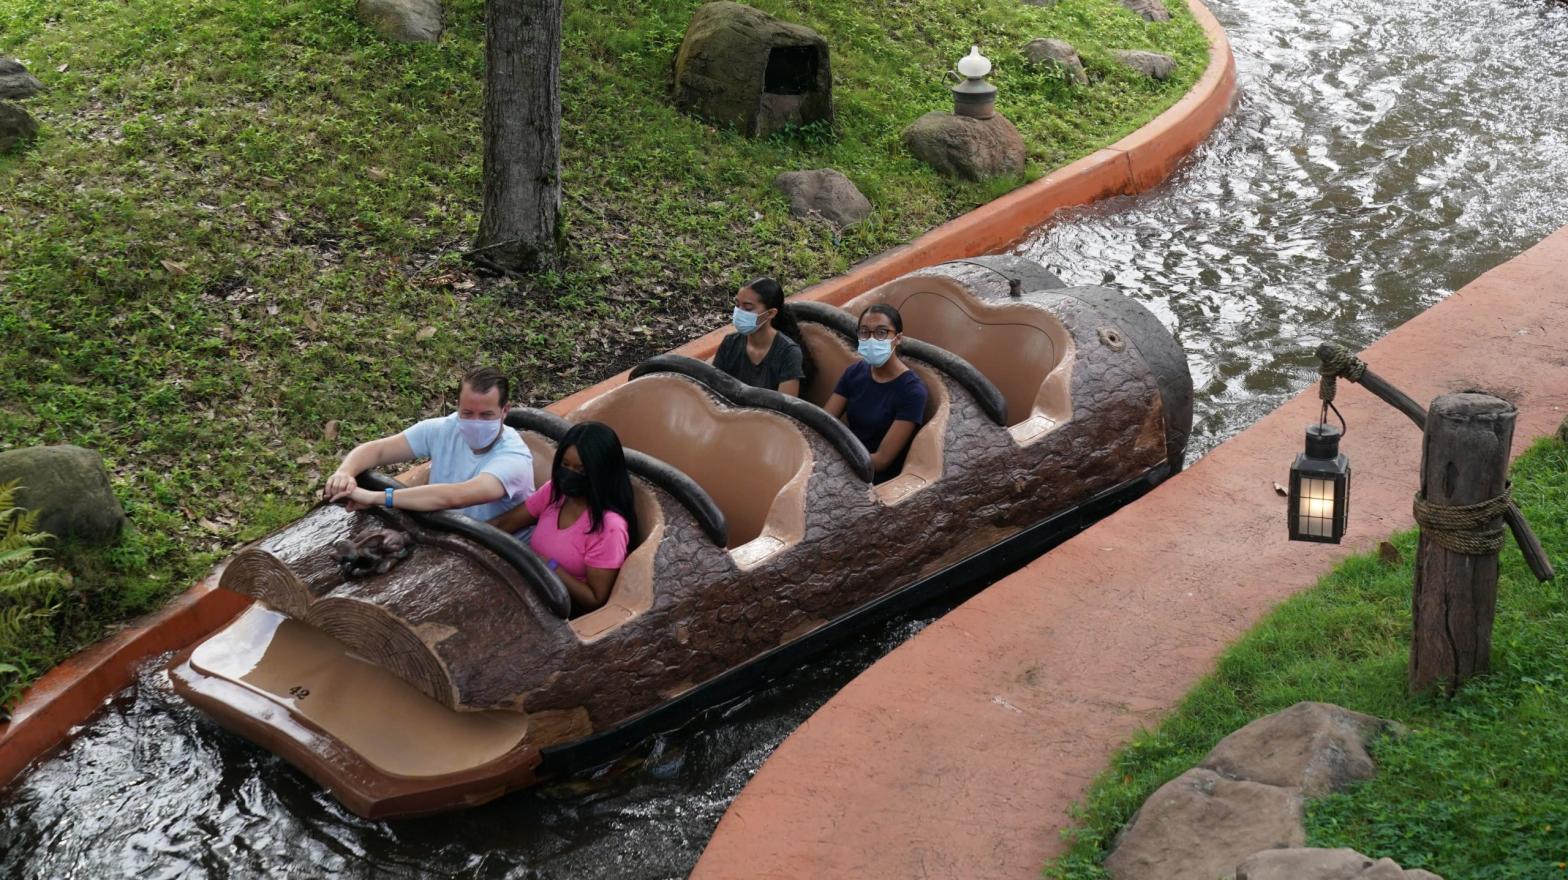 Passengers take a socially distant ride on Splash Mountain at Disney World.  (Photo: Bryan R. Smith/AFP, Getty Images)